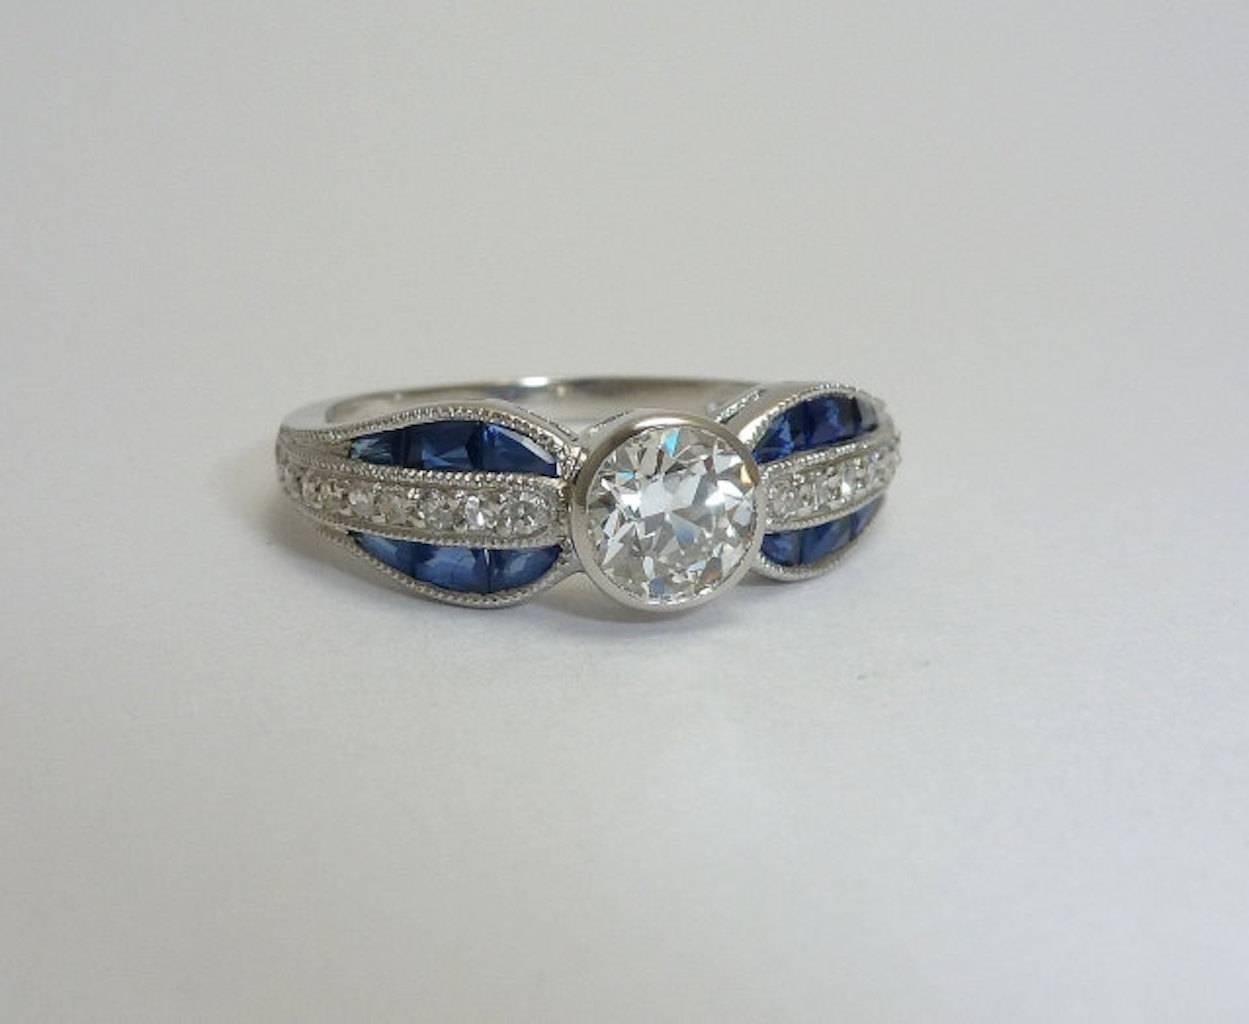 Beacon Hill Jewelers Presents:

A beautiful bow shaped diamond and sapphire ring in luxurious 900 fine platinum. Masterfully hand crafted, this stunning ring features a center bezel set diamond accented by custom cut French cut sapphires and